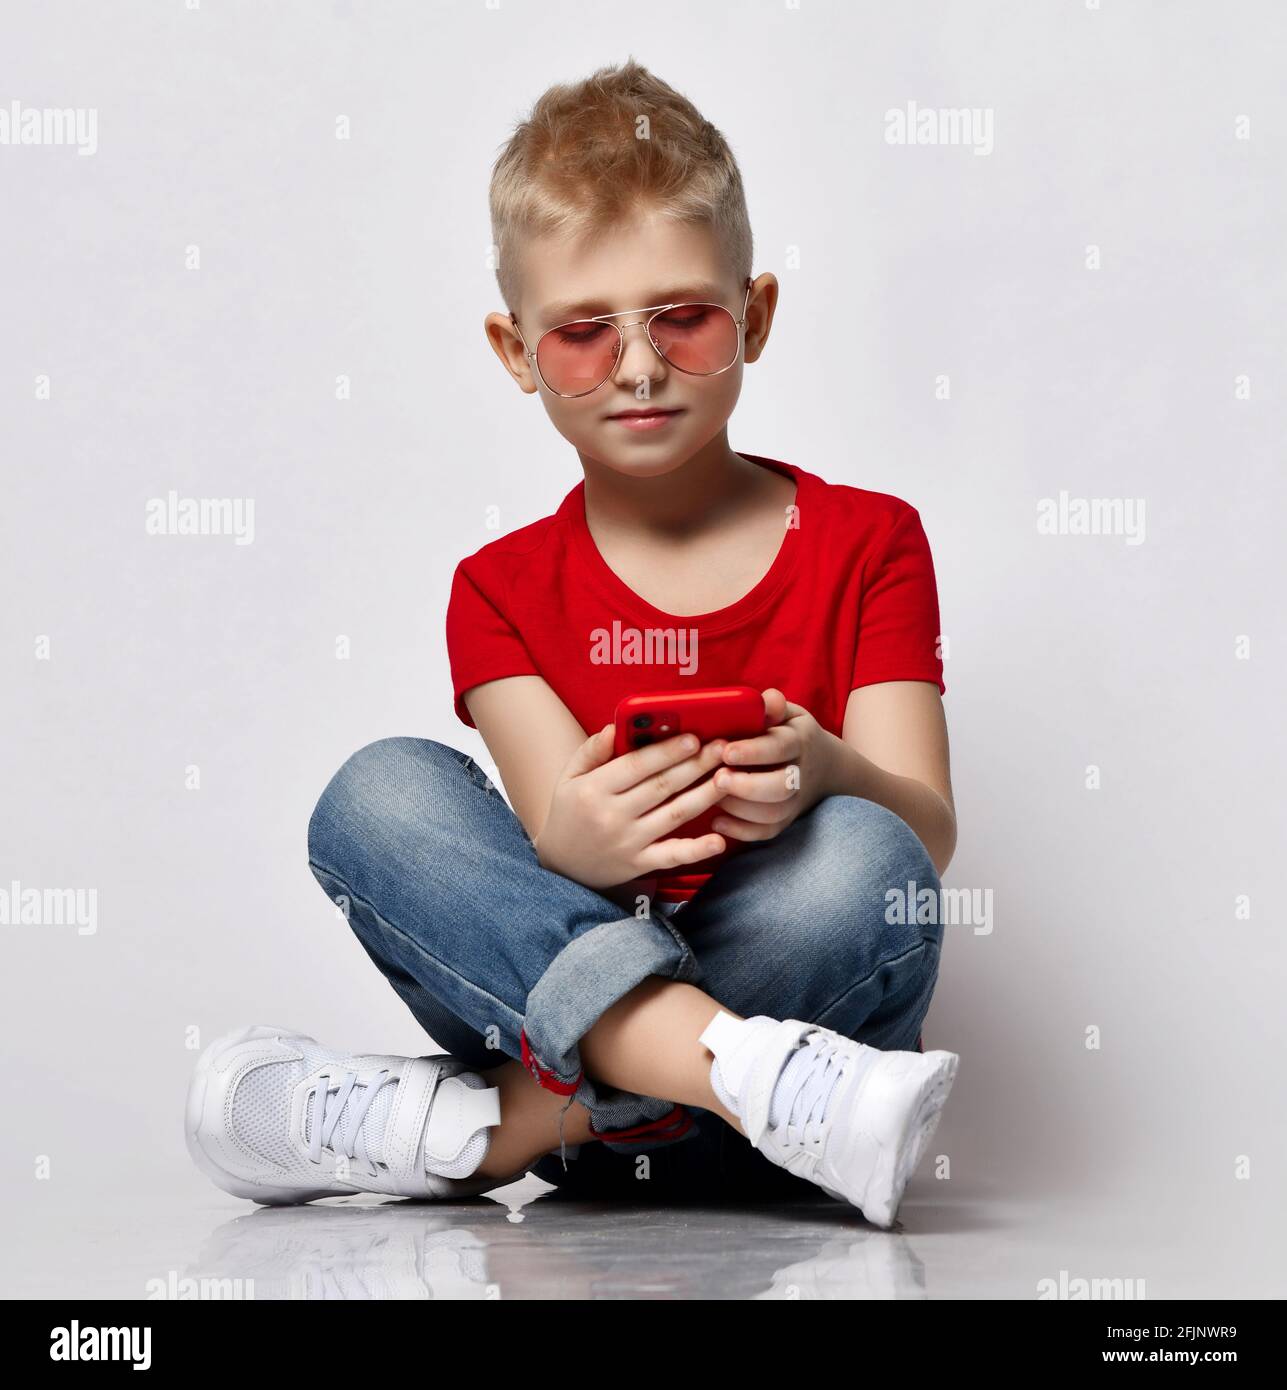 Stylish kid boy child in red t-shirt, jeans, sneakers and sunglasses sitting on floor with legs crossed looking at smartphone Stock Photo